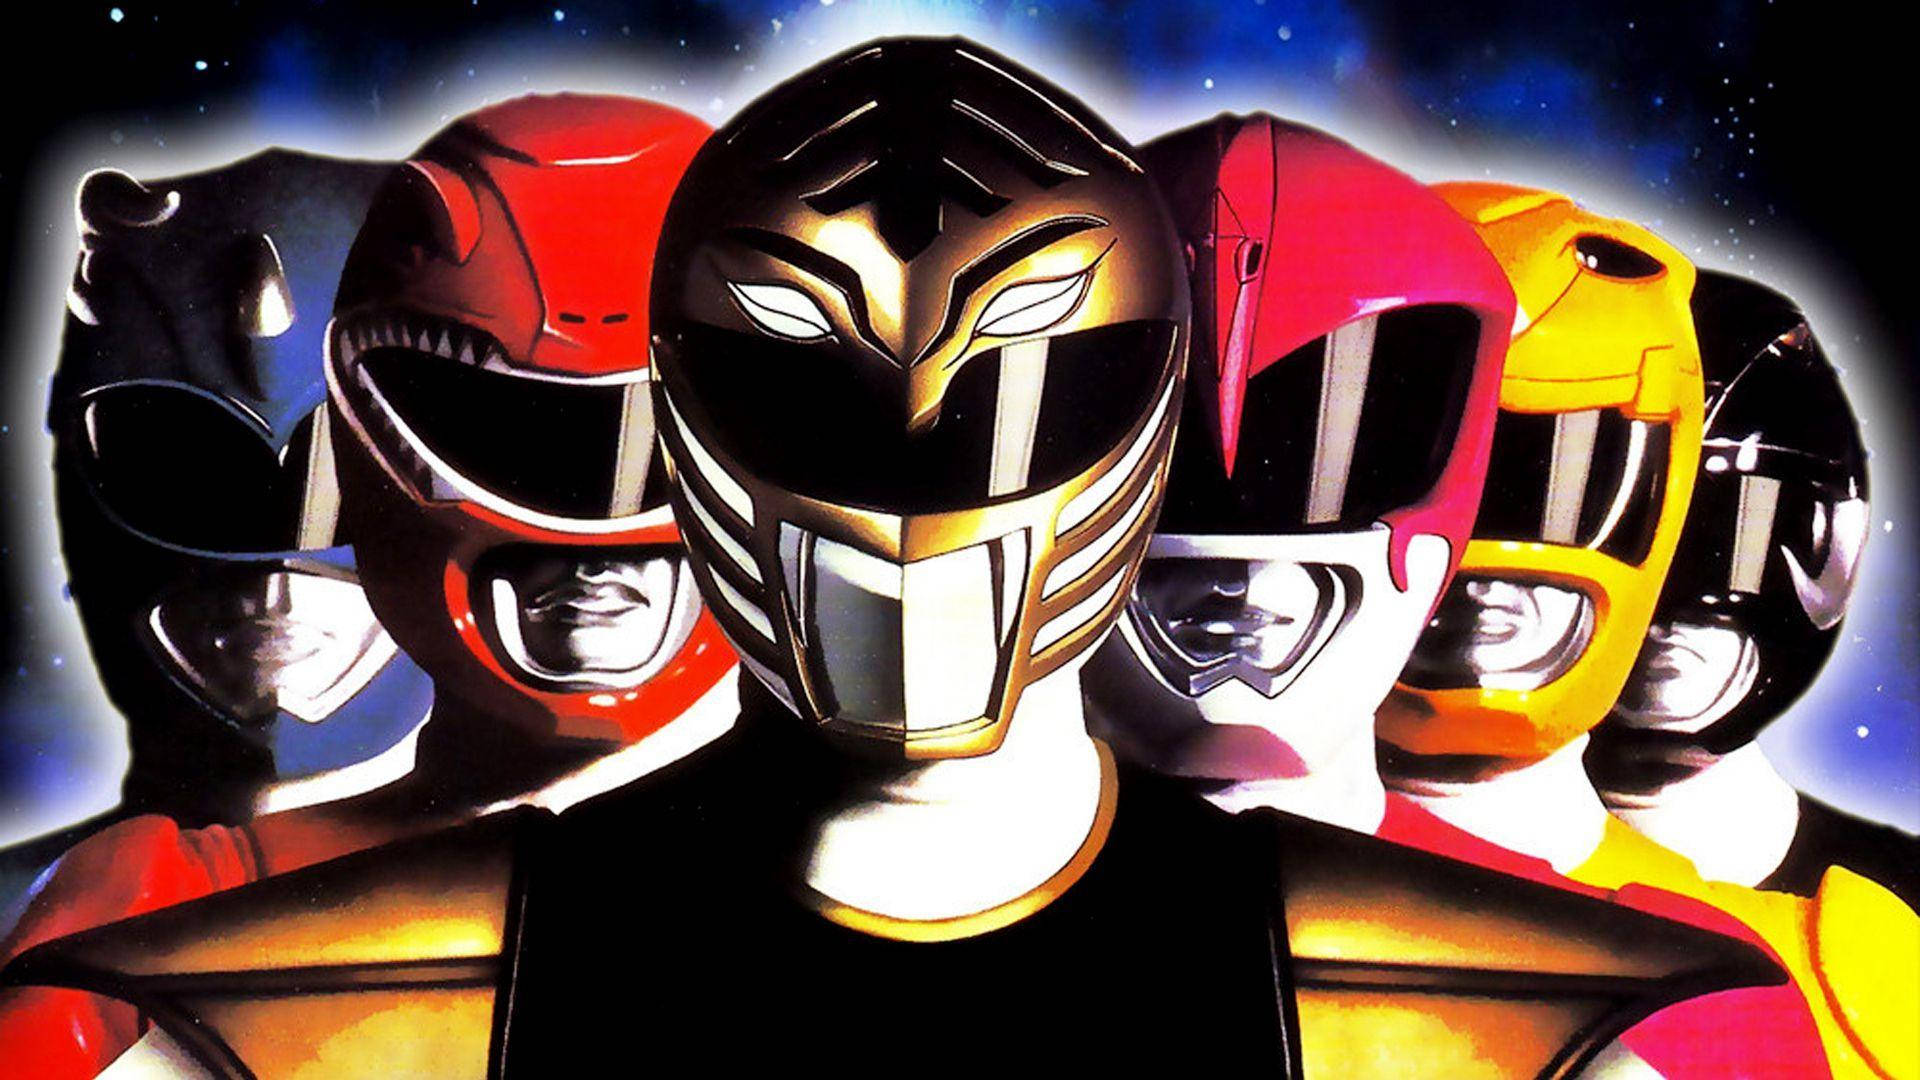 Mighty Morphin Power Rangers Poster